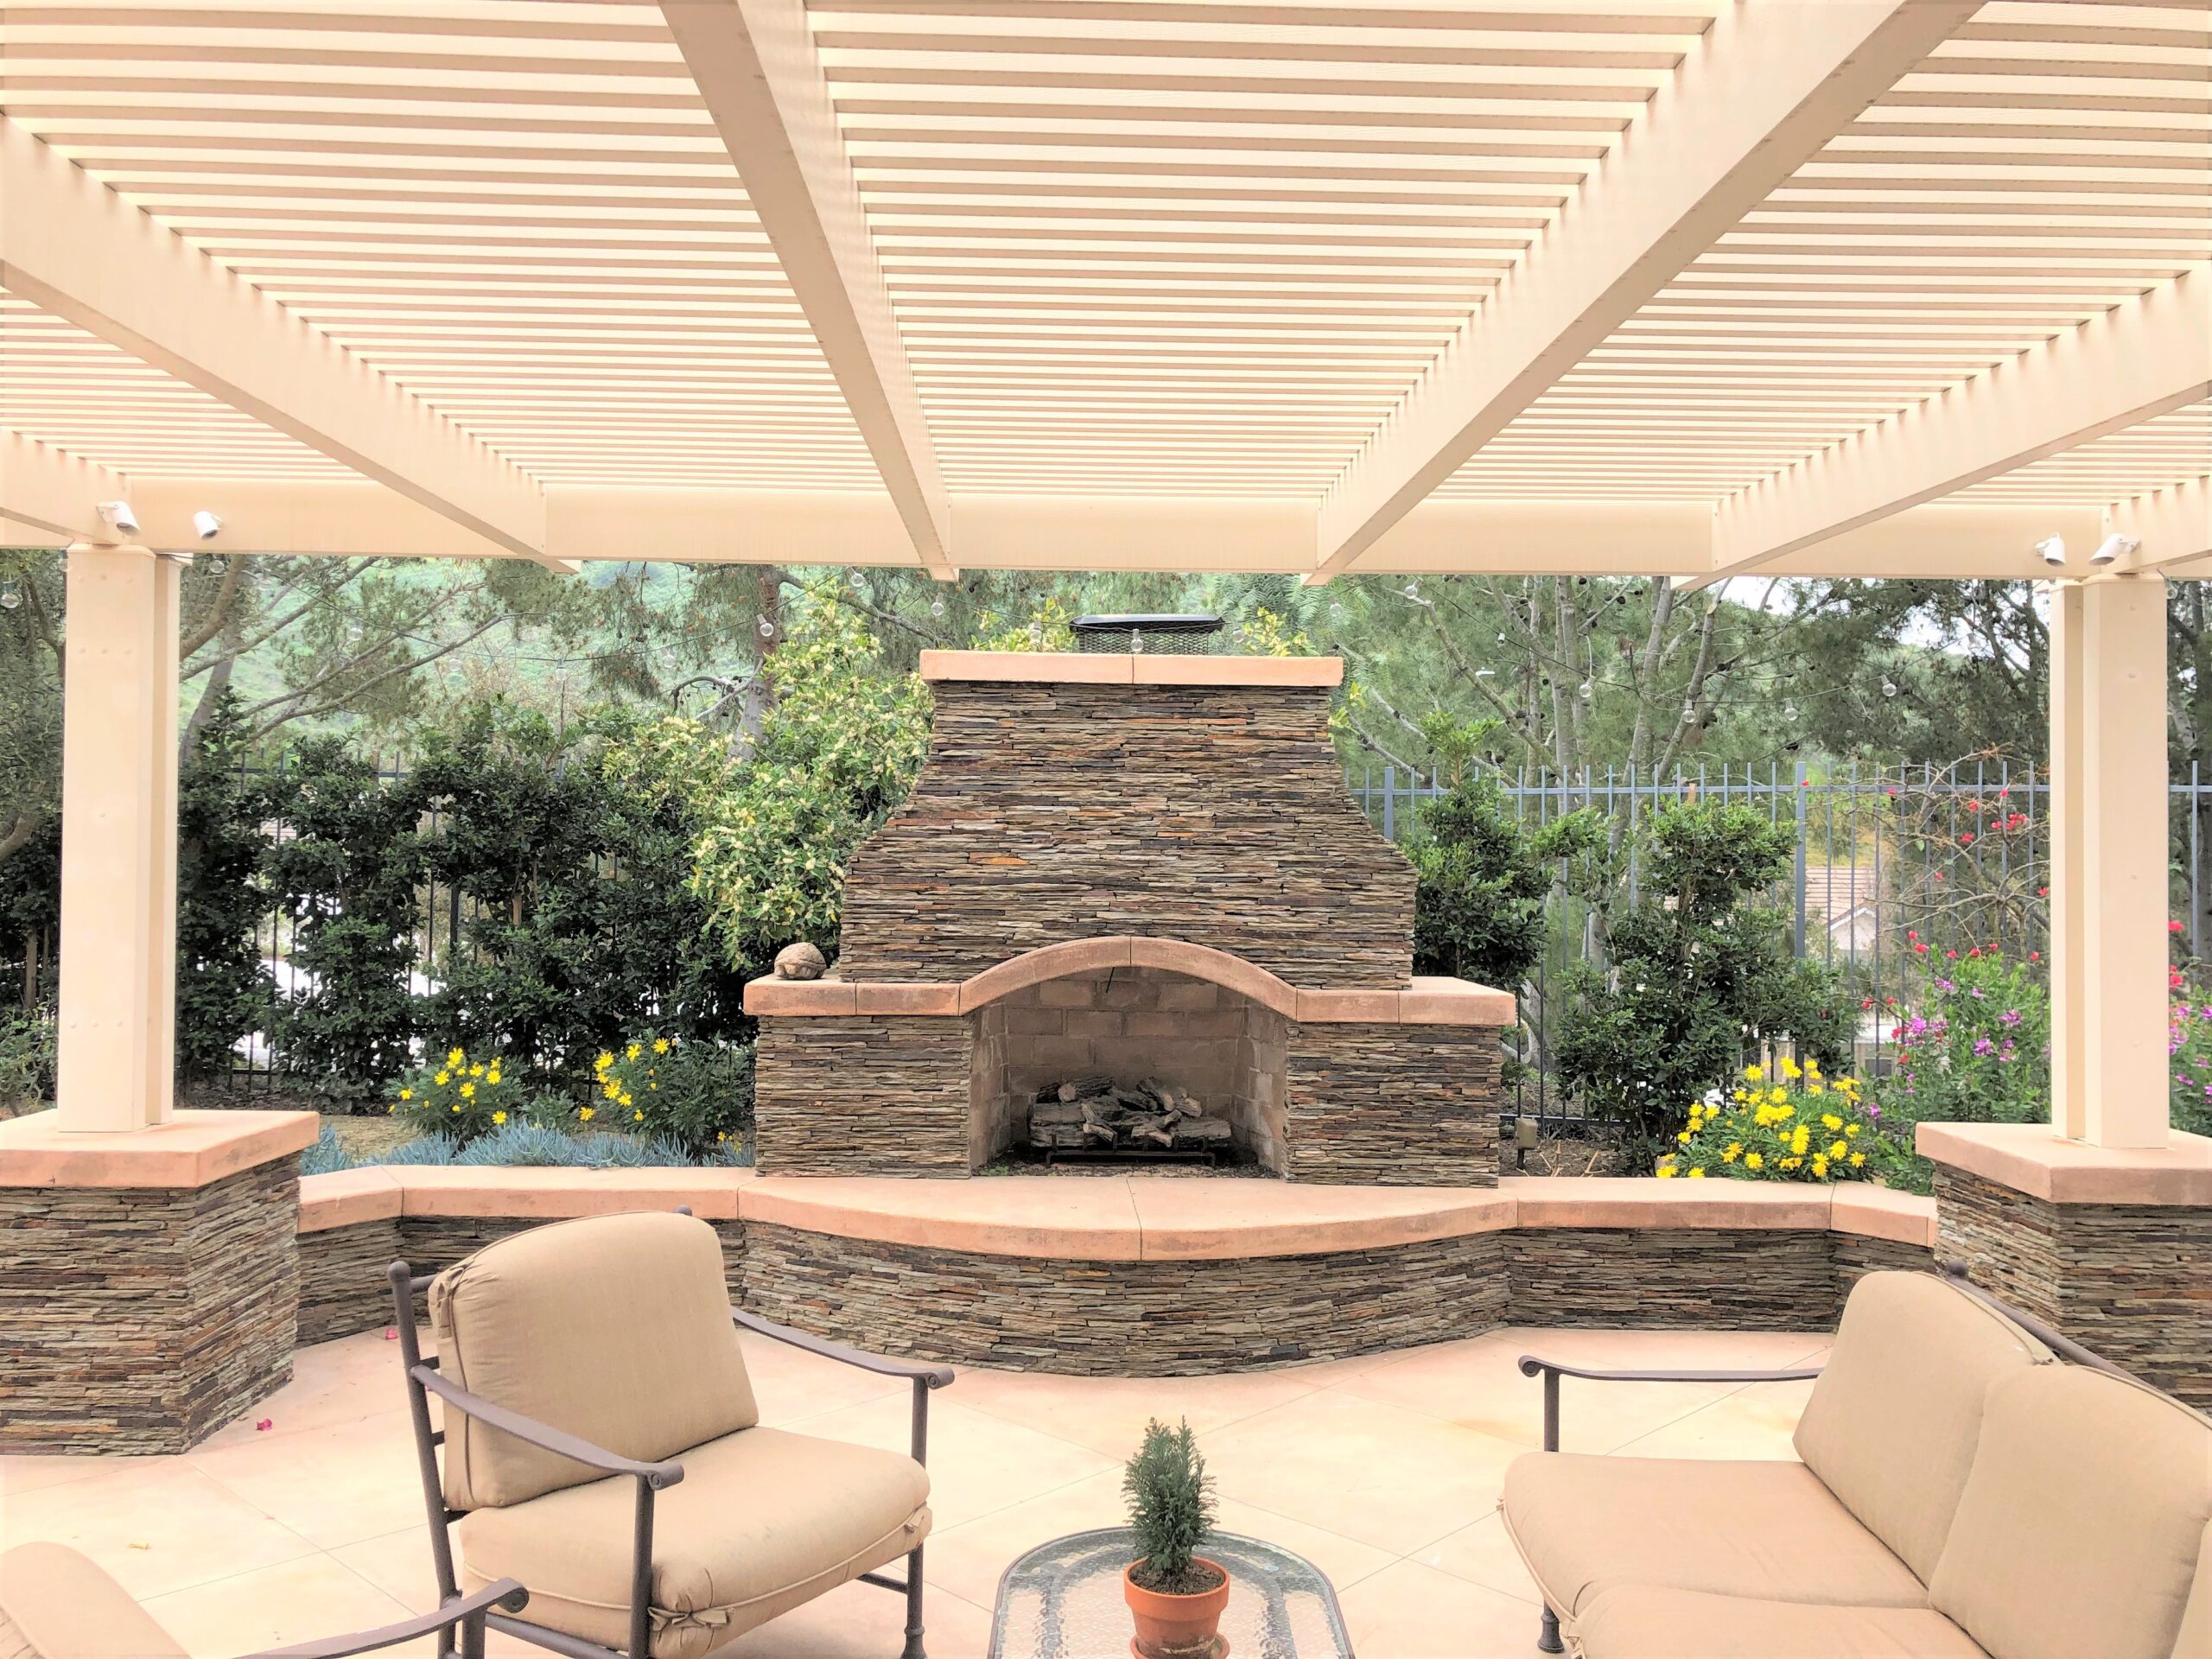 Patio Covers in Mission Viejo- Designs & Planning